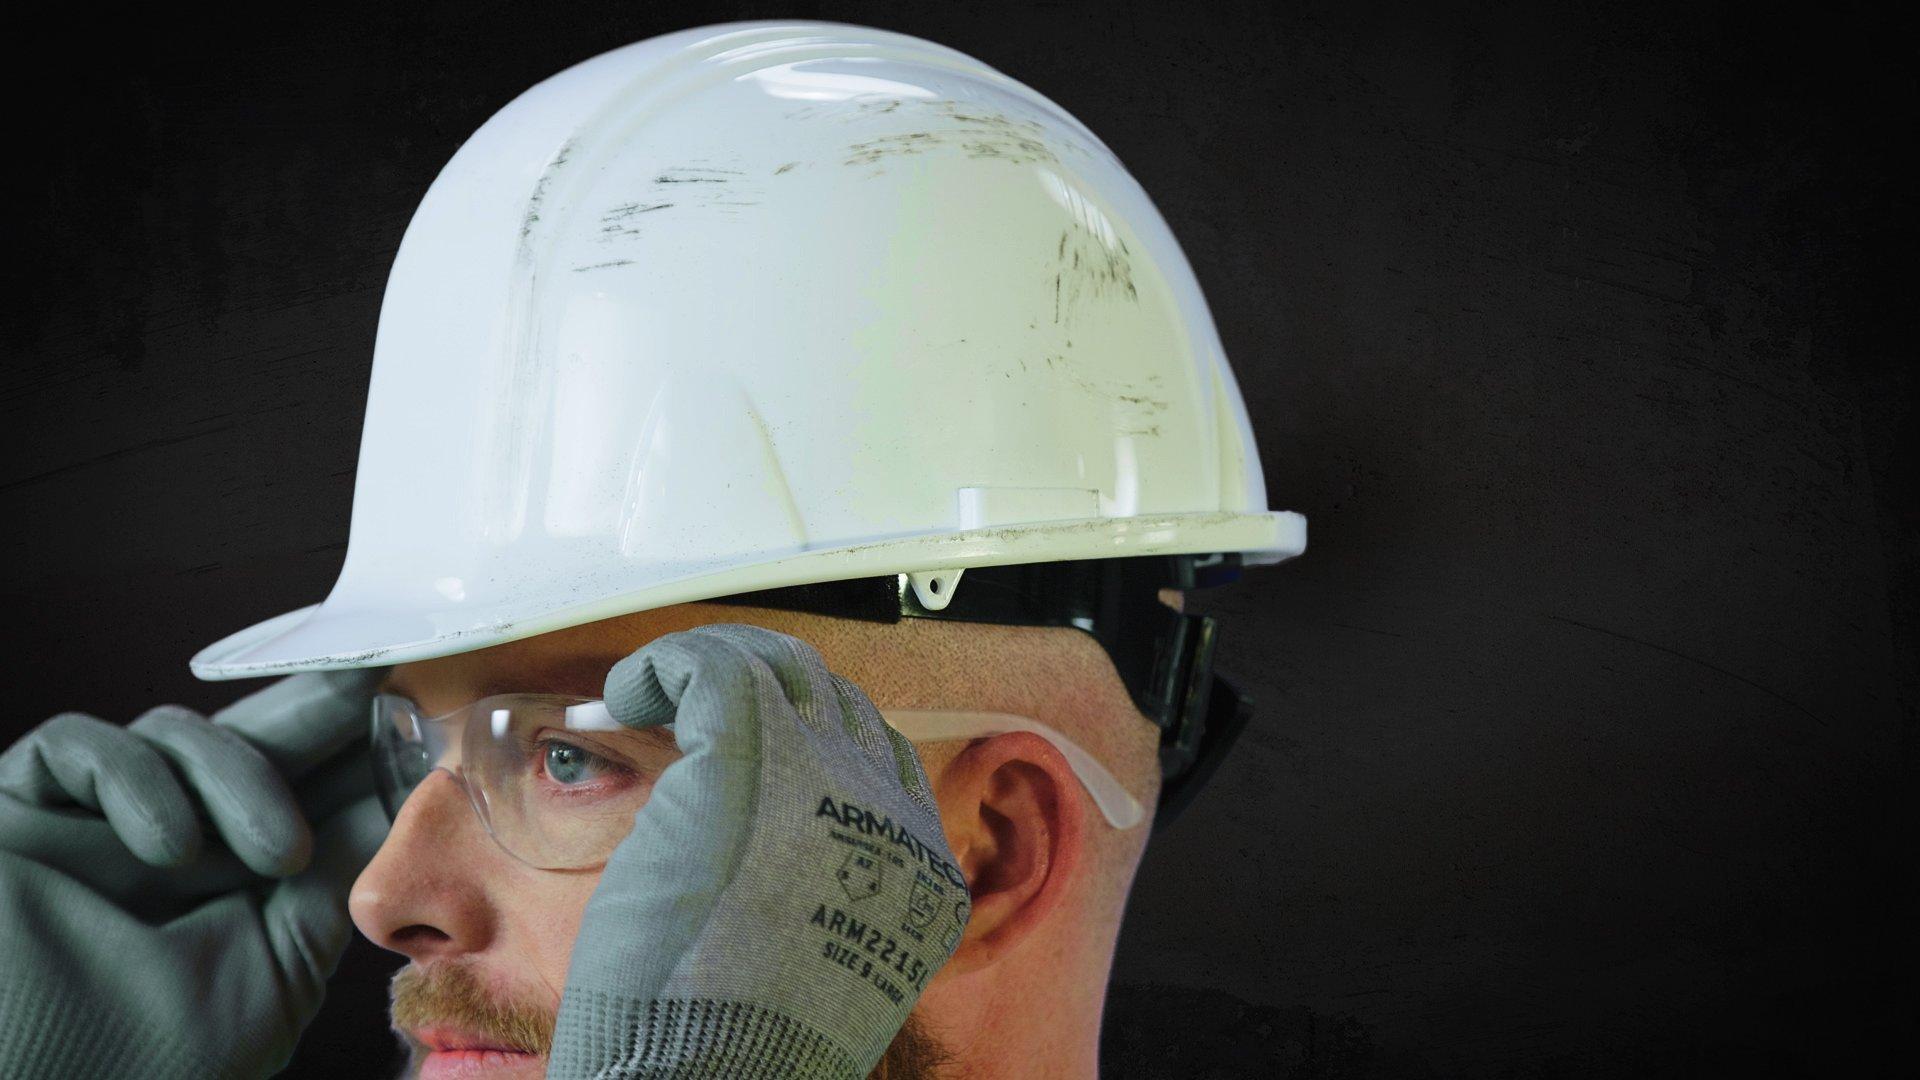 A man wearing a white hard hat and Armateck hand protection puts on safety glasses.